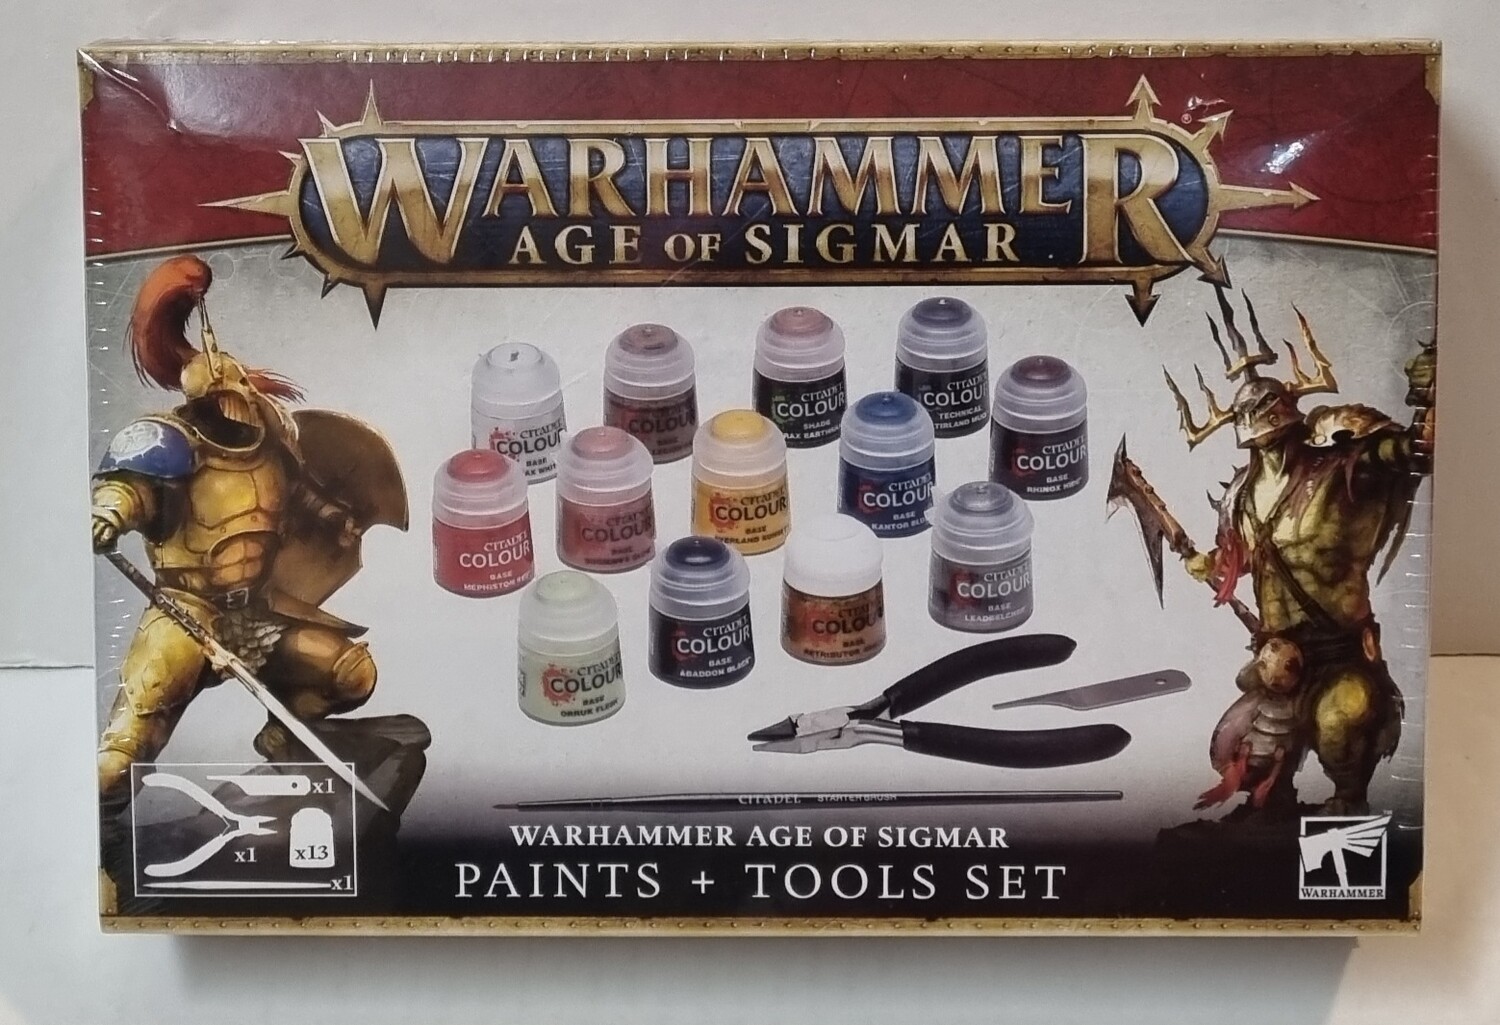 Warhammer, Age of Sigmar, 80-17, Paints + Tools Set